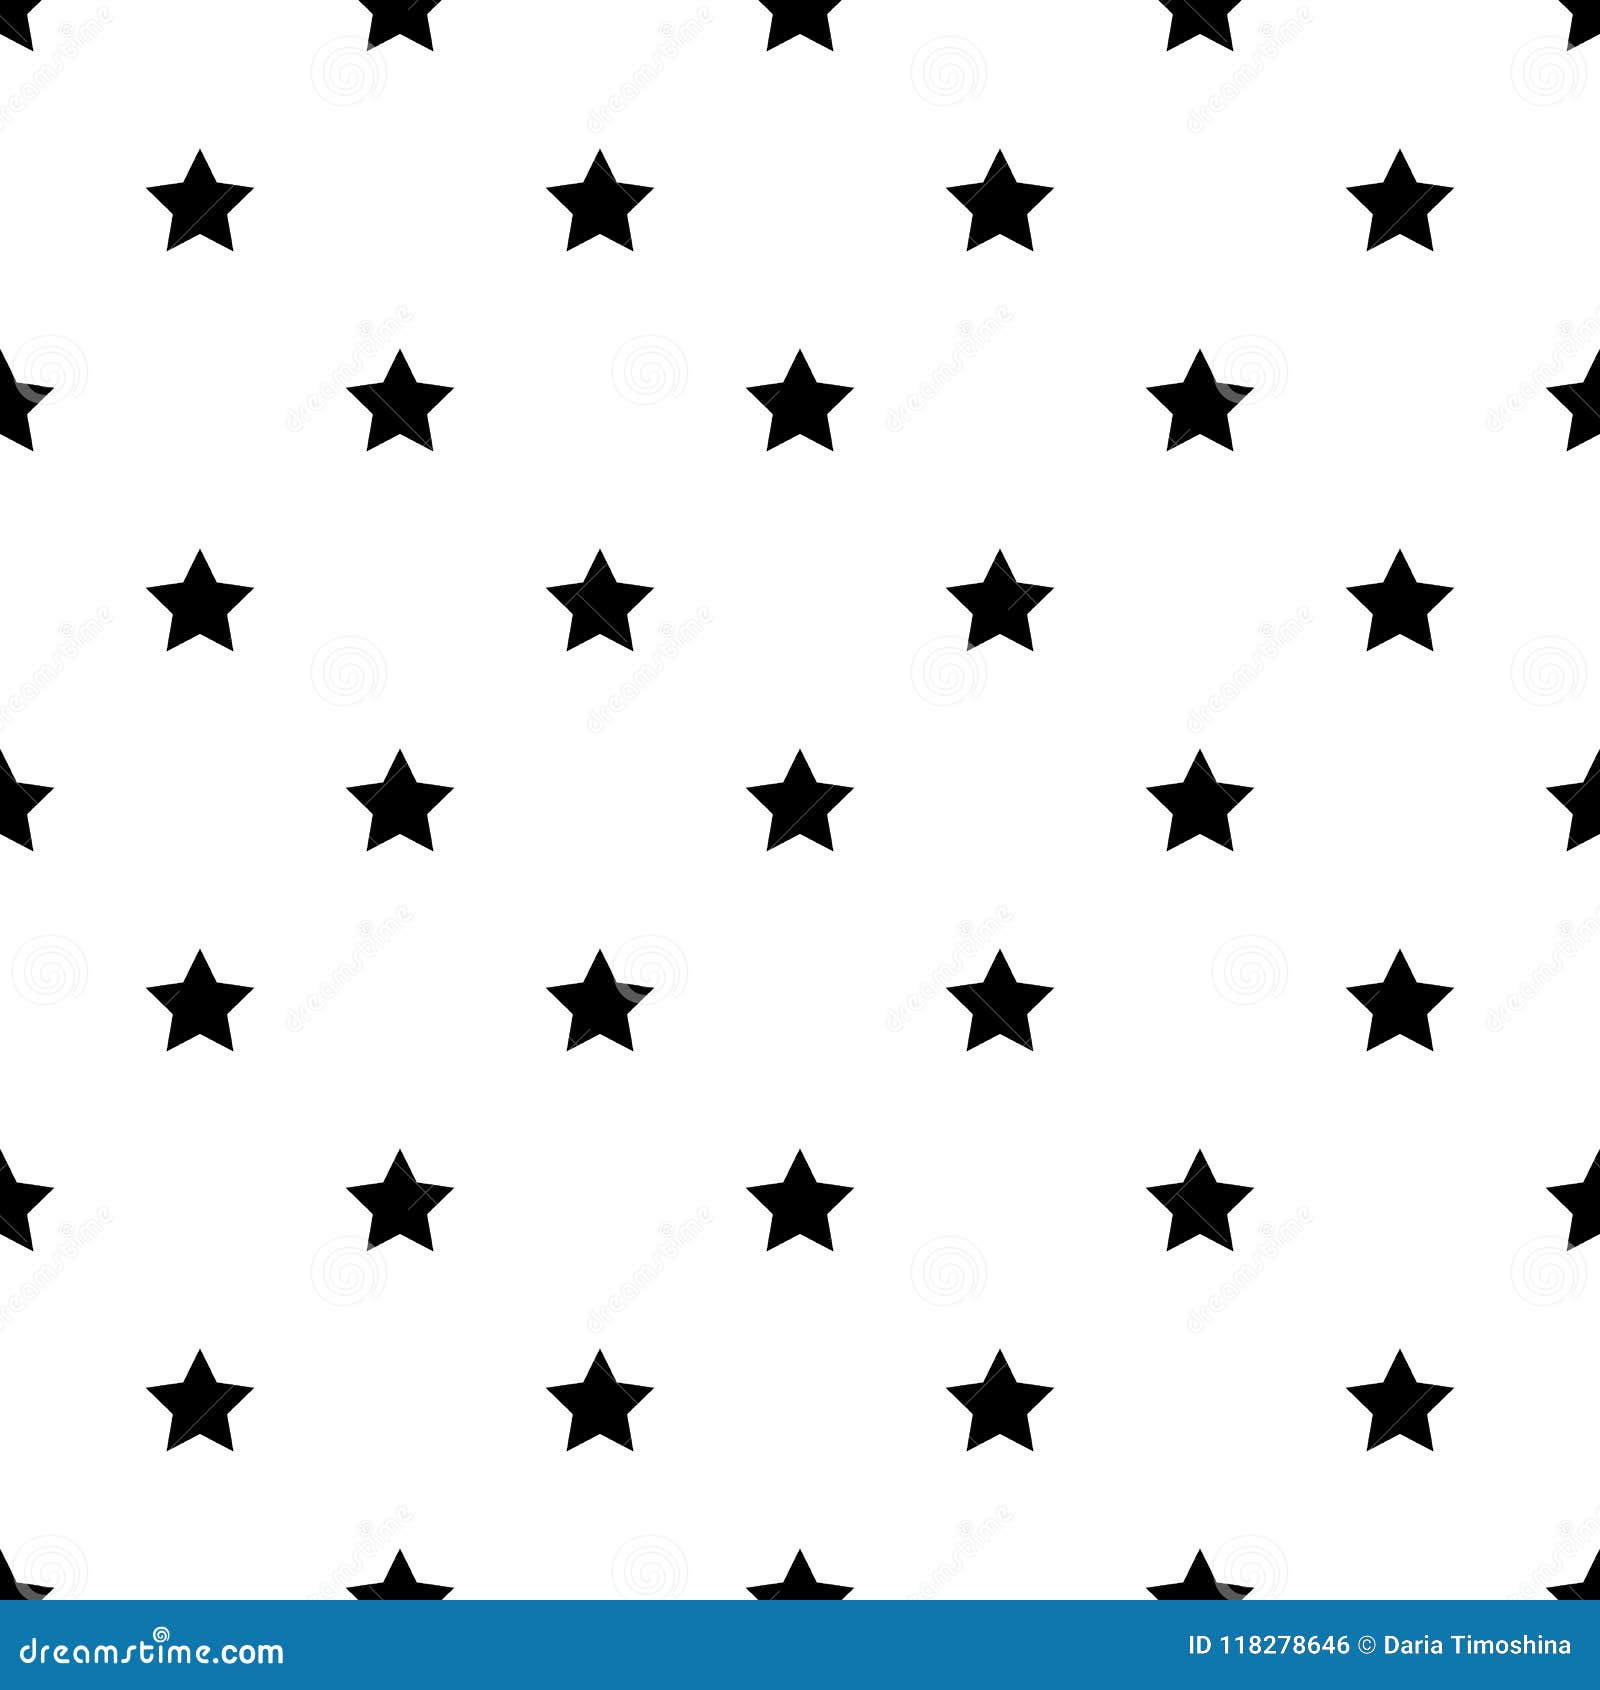 Seamless Star Pattern stock vector. Illustration of graphic - 118278646